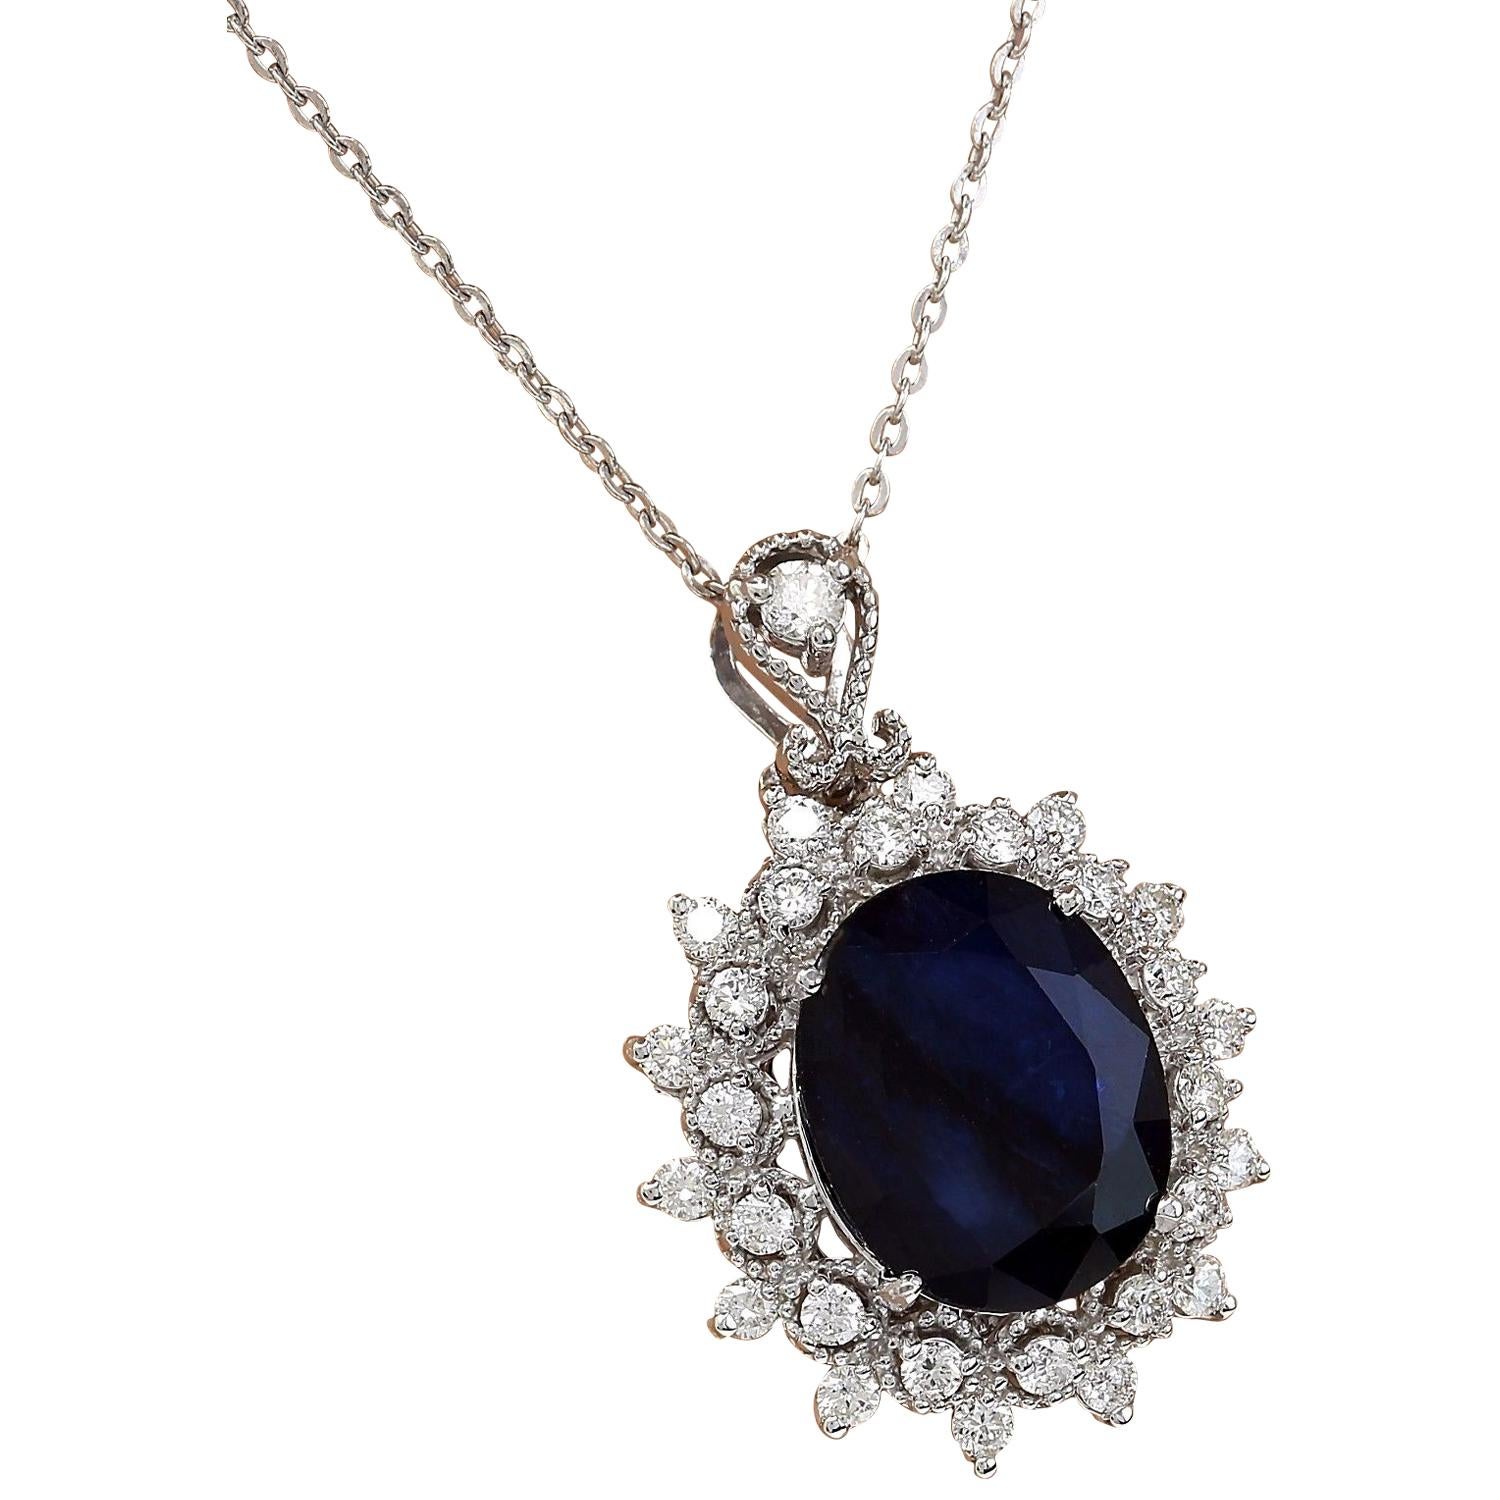 5.25 Carat Natural Sapphire 14K Solid White Gold Diamond Pendant Necklace
 Item Type: Necklace
 Item Style: Drop
 Item Length: 16 Inches
 Material: 14K White Gold
 Mainstone: Sapphire
 Stone Color: Blue
 Stone Weight: 4.40 Carat
 Stone Shape: Oval
